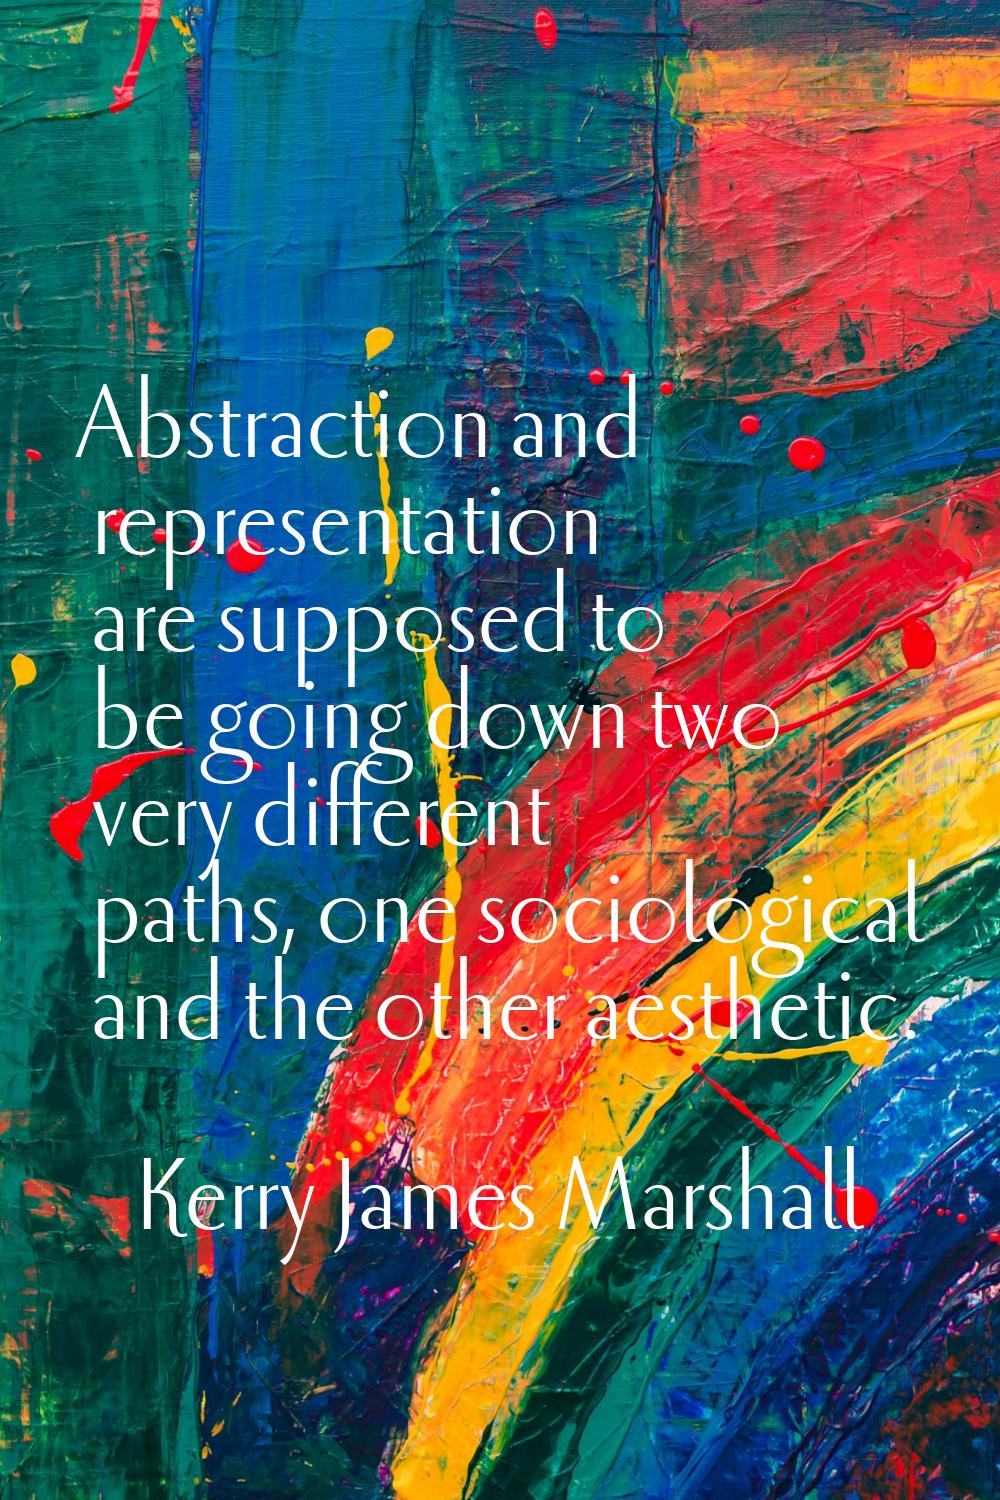 Abstraction and representation are supposed to be going down two very different paths, one sociolog